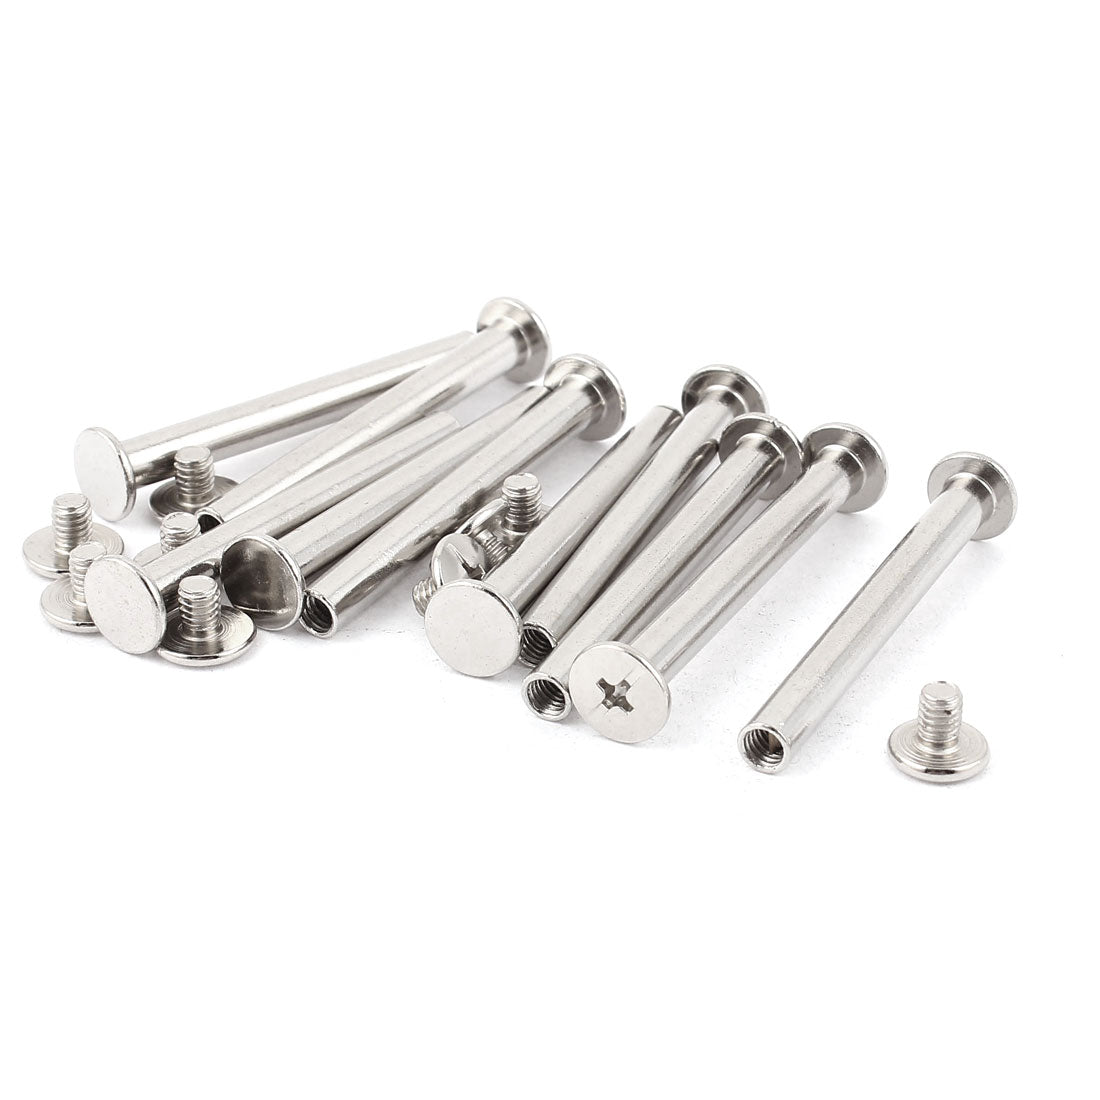 uxcell Uxcell 10pcs 5mmx45mm Nickel Plated Binding Chicago Screw Post for Album Scrapbook